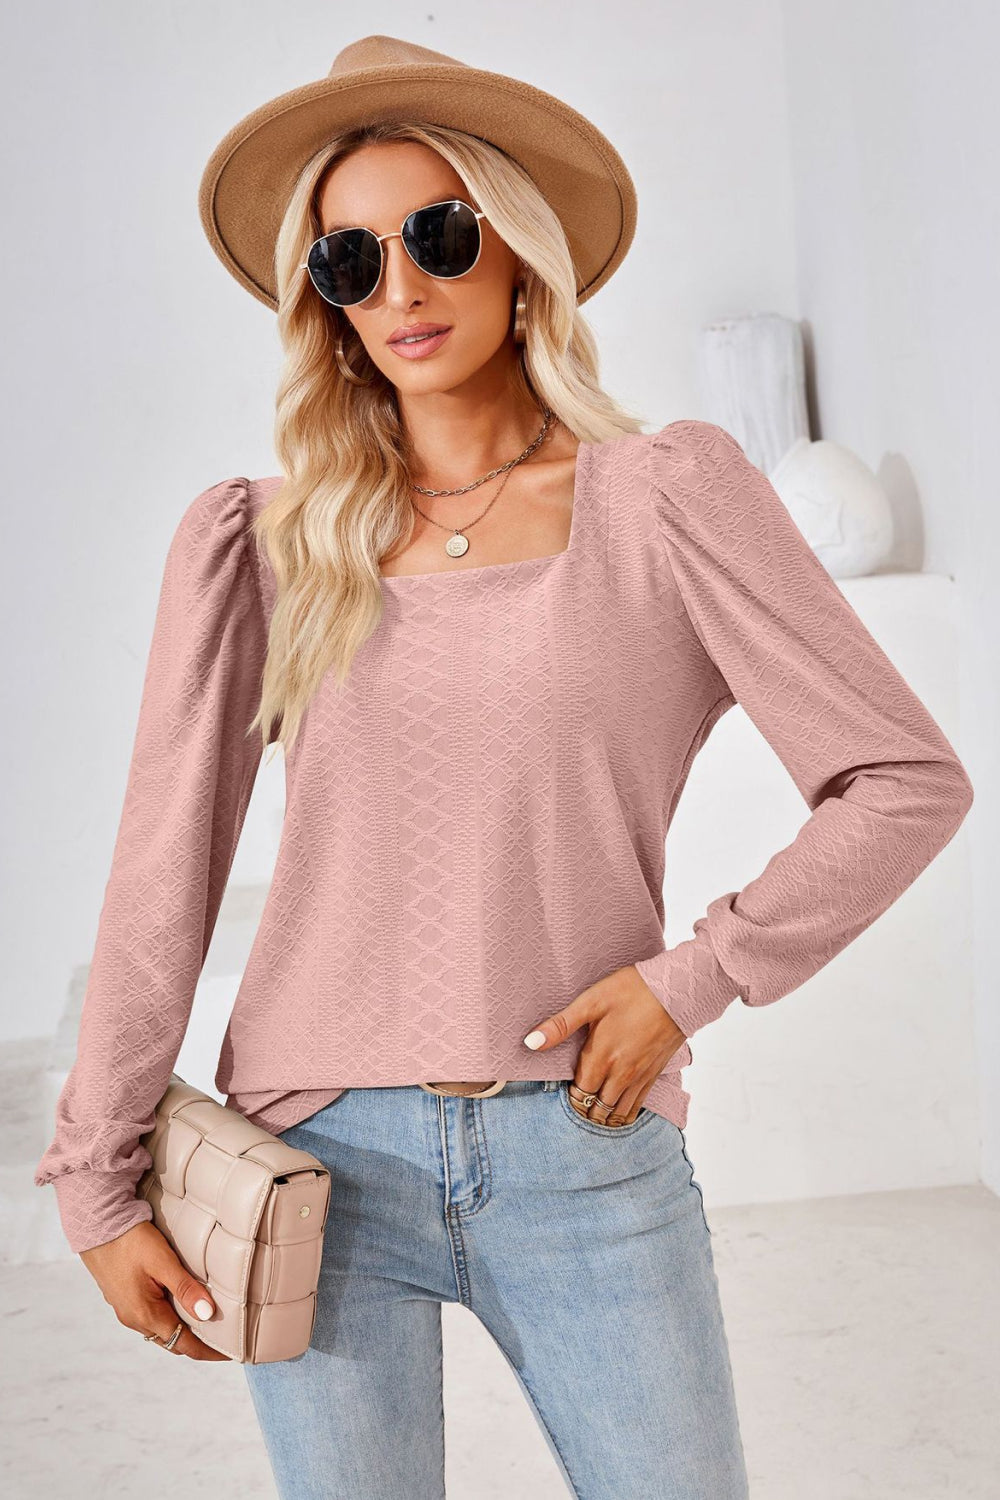 Square Neck Puff Sleeve Blouse - Light Pink / S - Women’s Clothing & Accessories - Shirts & Tops - 21 - 2024